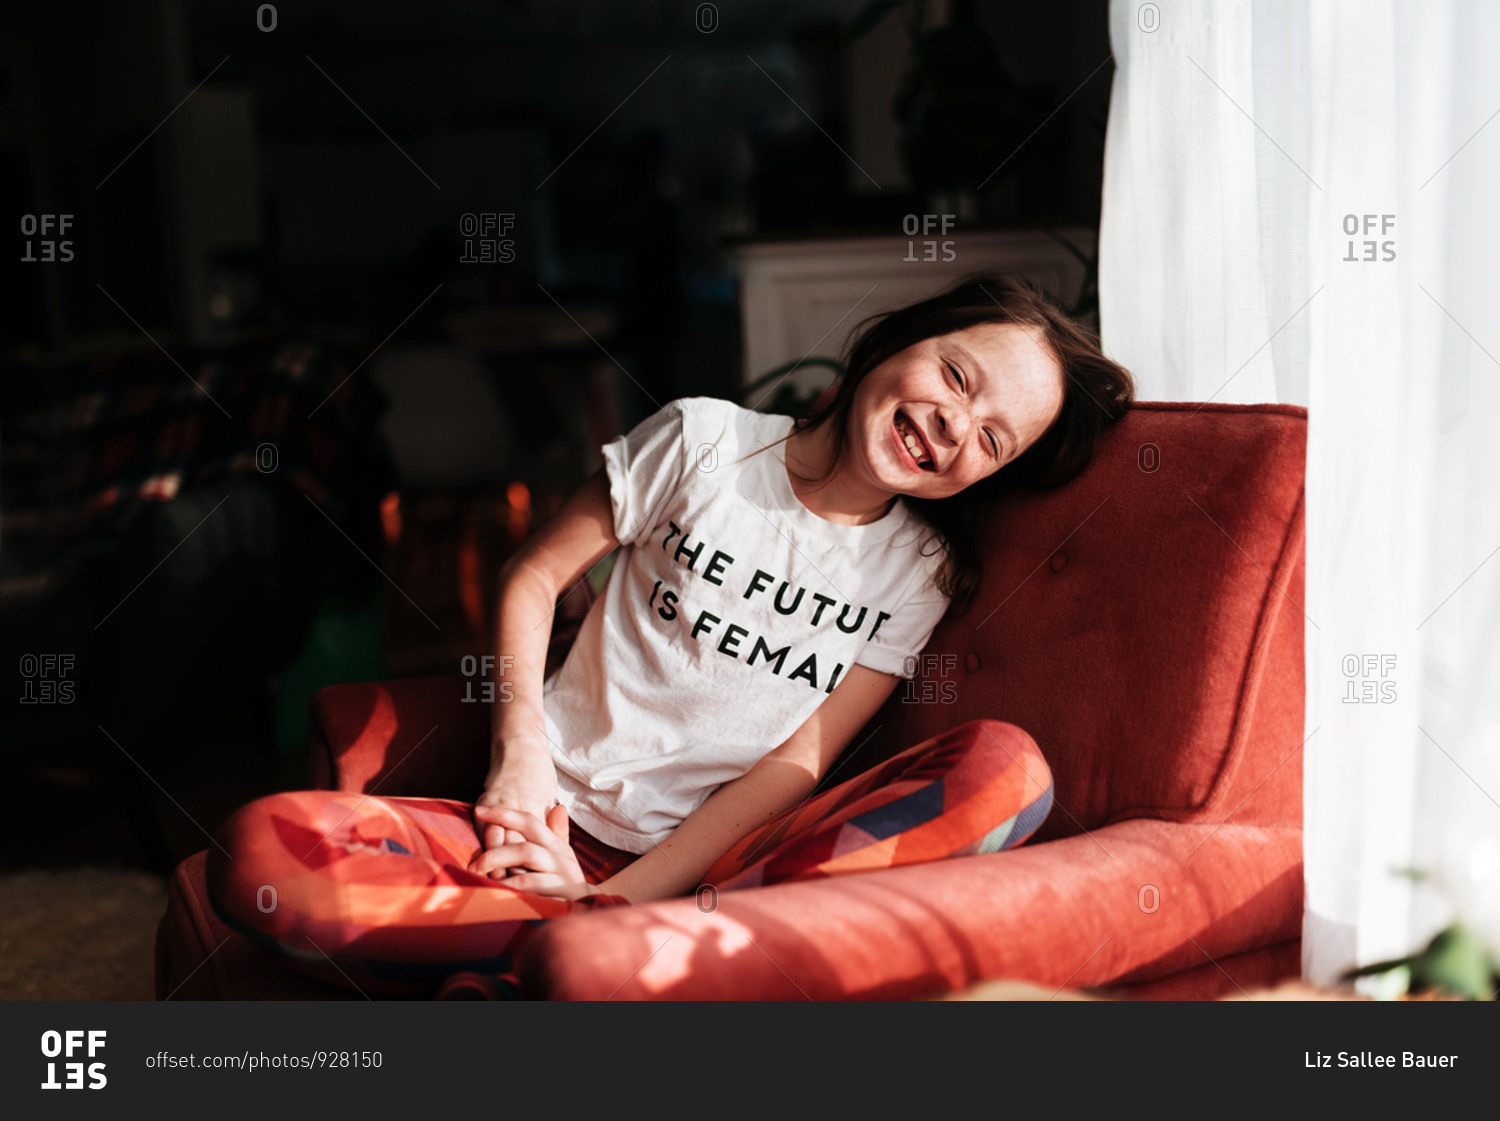 Portrait of a smiling young girl with a shirt that says \